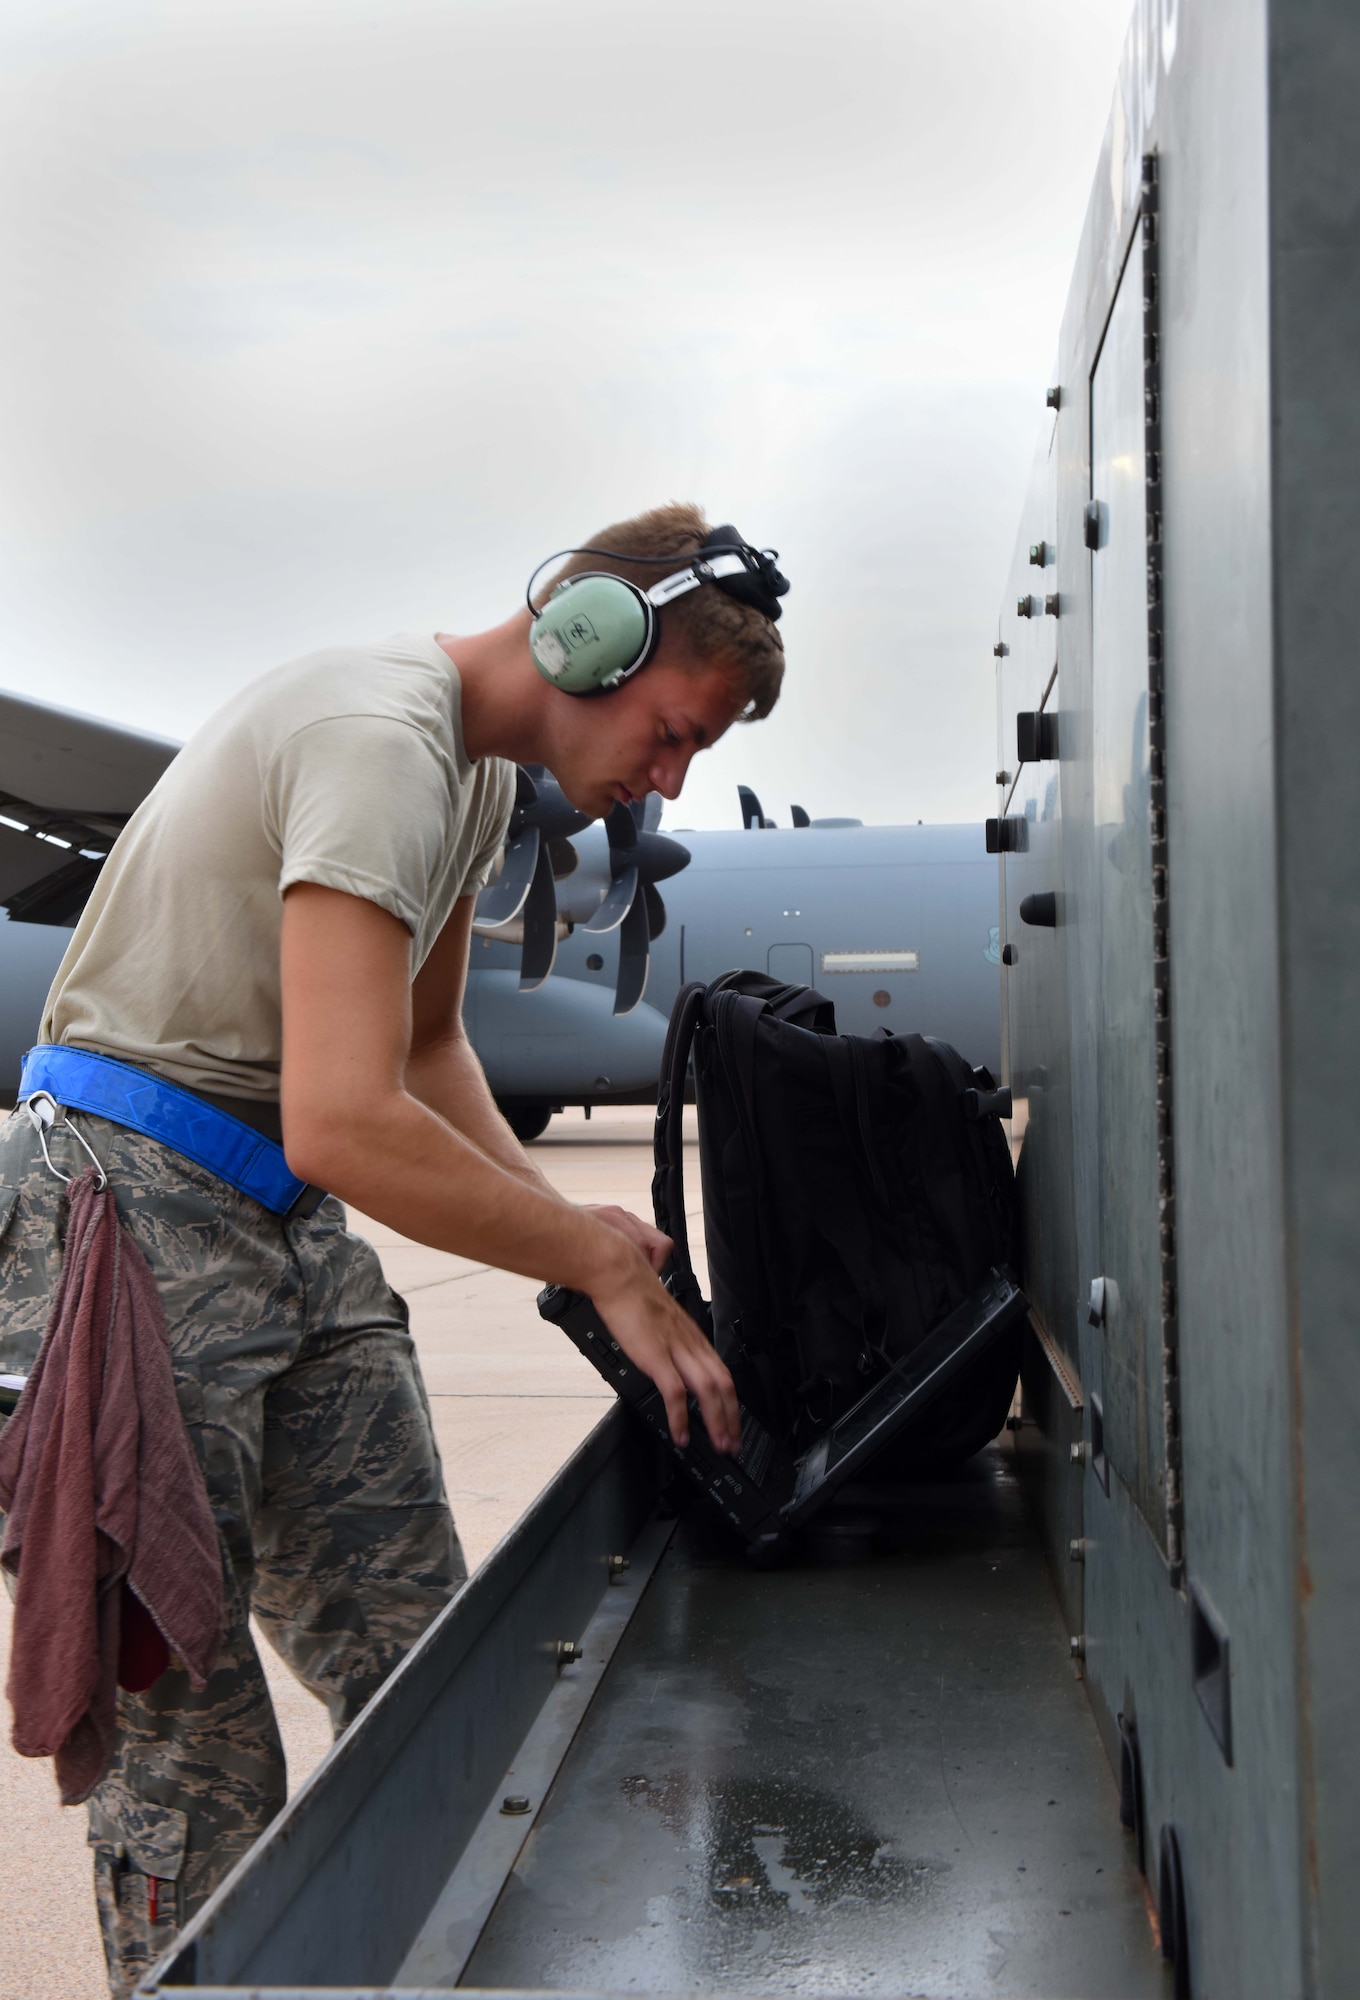 Airman 1st Class Jordan Diehl, 317th Aircraft Maintenance Squadron crew chief, reviews C-130J Super Hercules aircraft technical orders during pre-flight operations at Dyess Air Force Base, Texas, July 14, 2020.